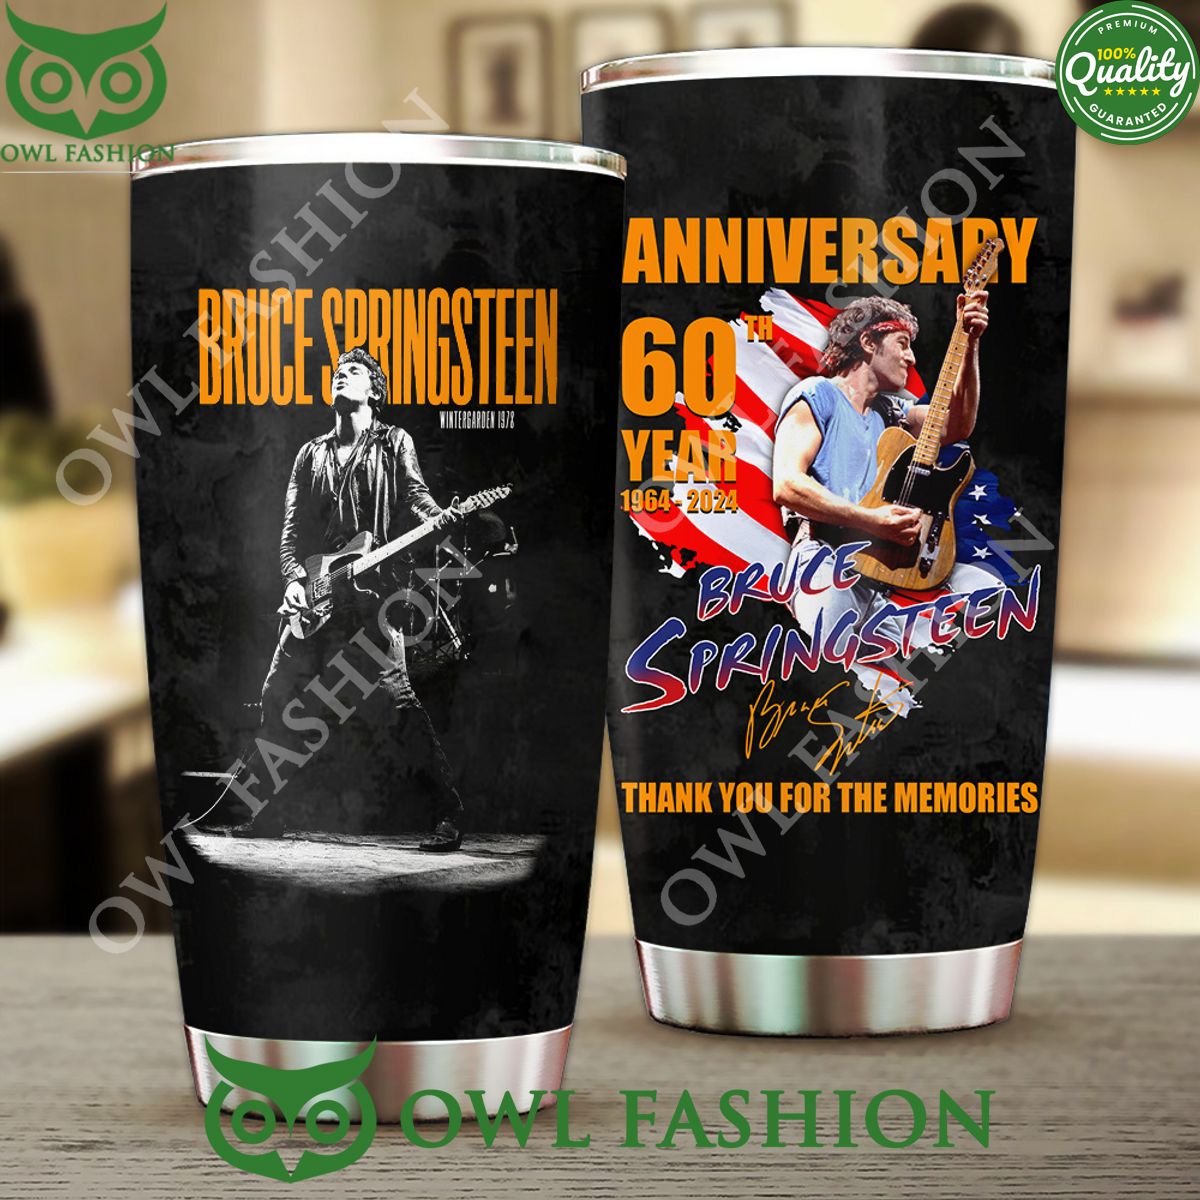 bruce springsteen anniversary 60th year tumbler cup 1 9tL8w.jpg